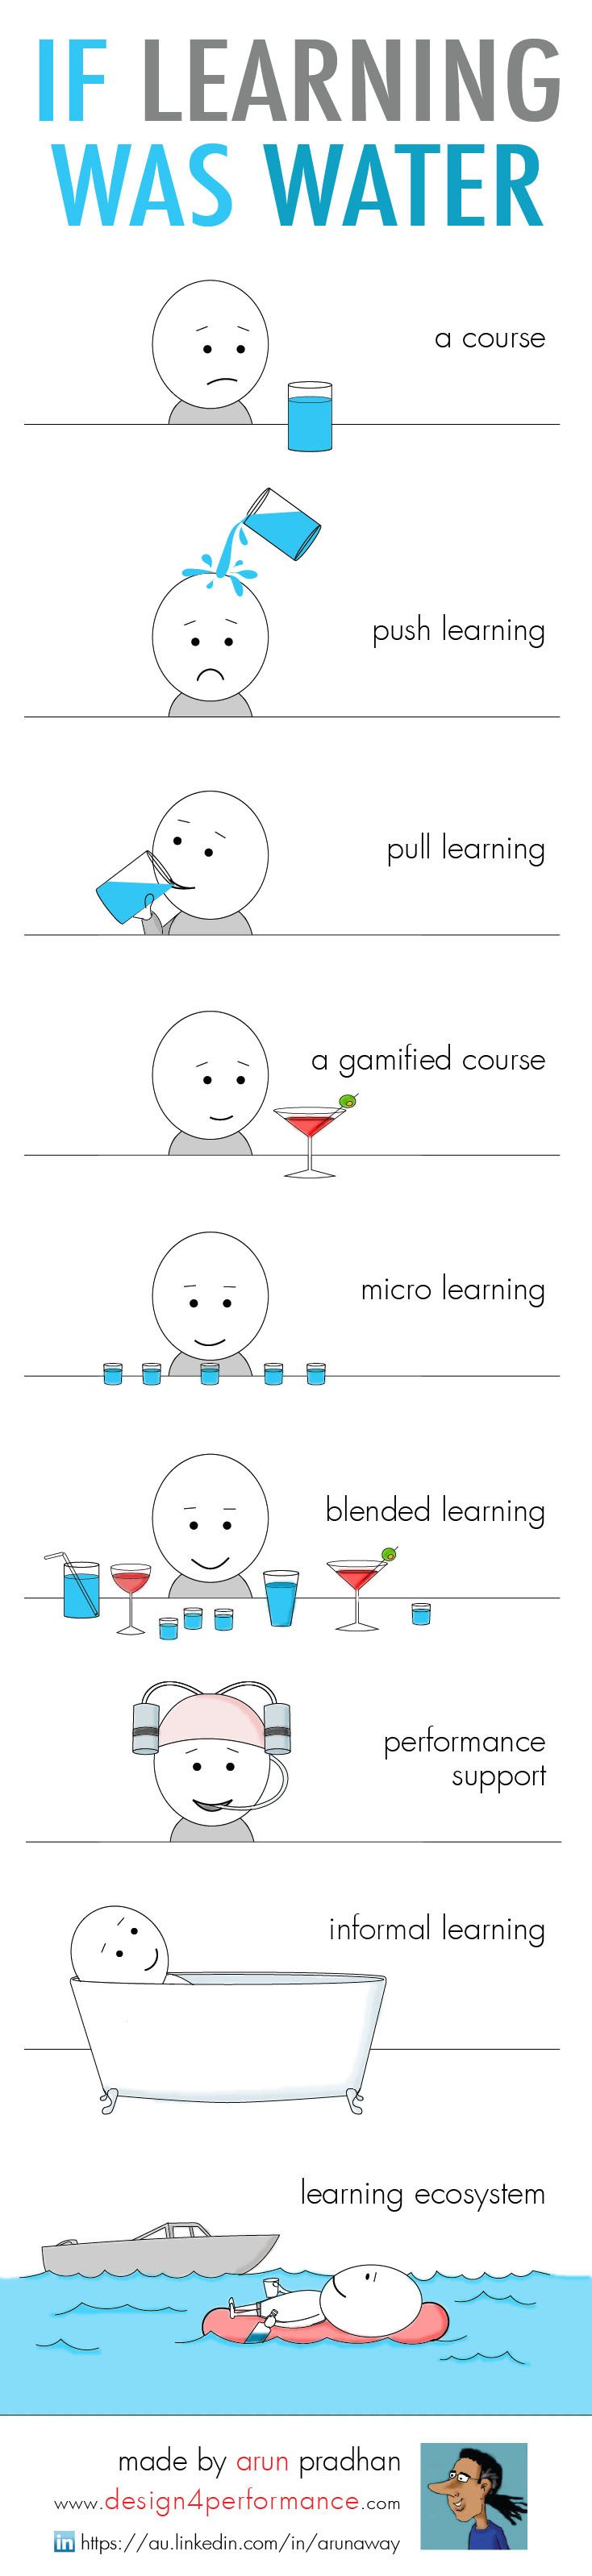 If Learning Was Water Infographic